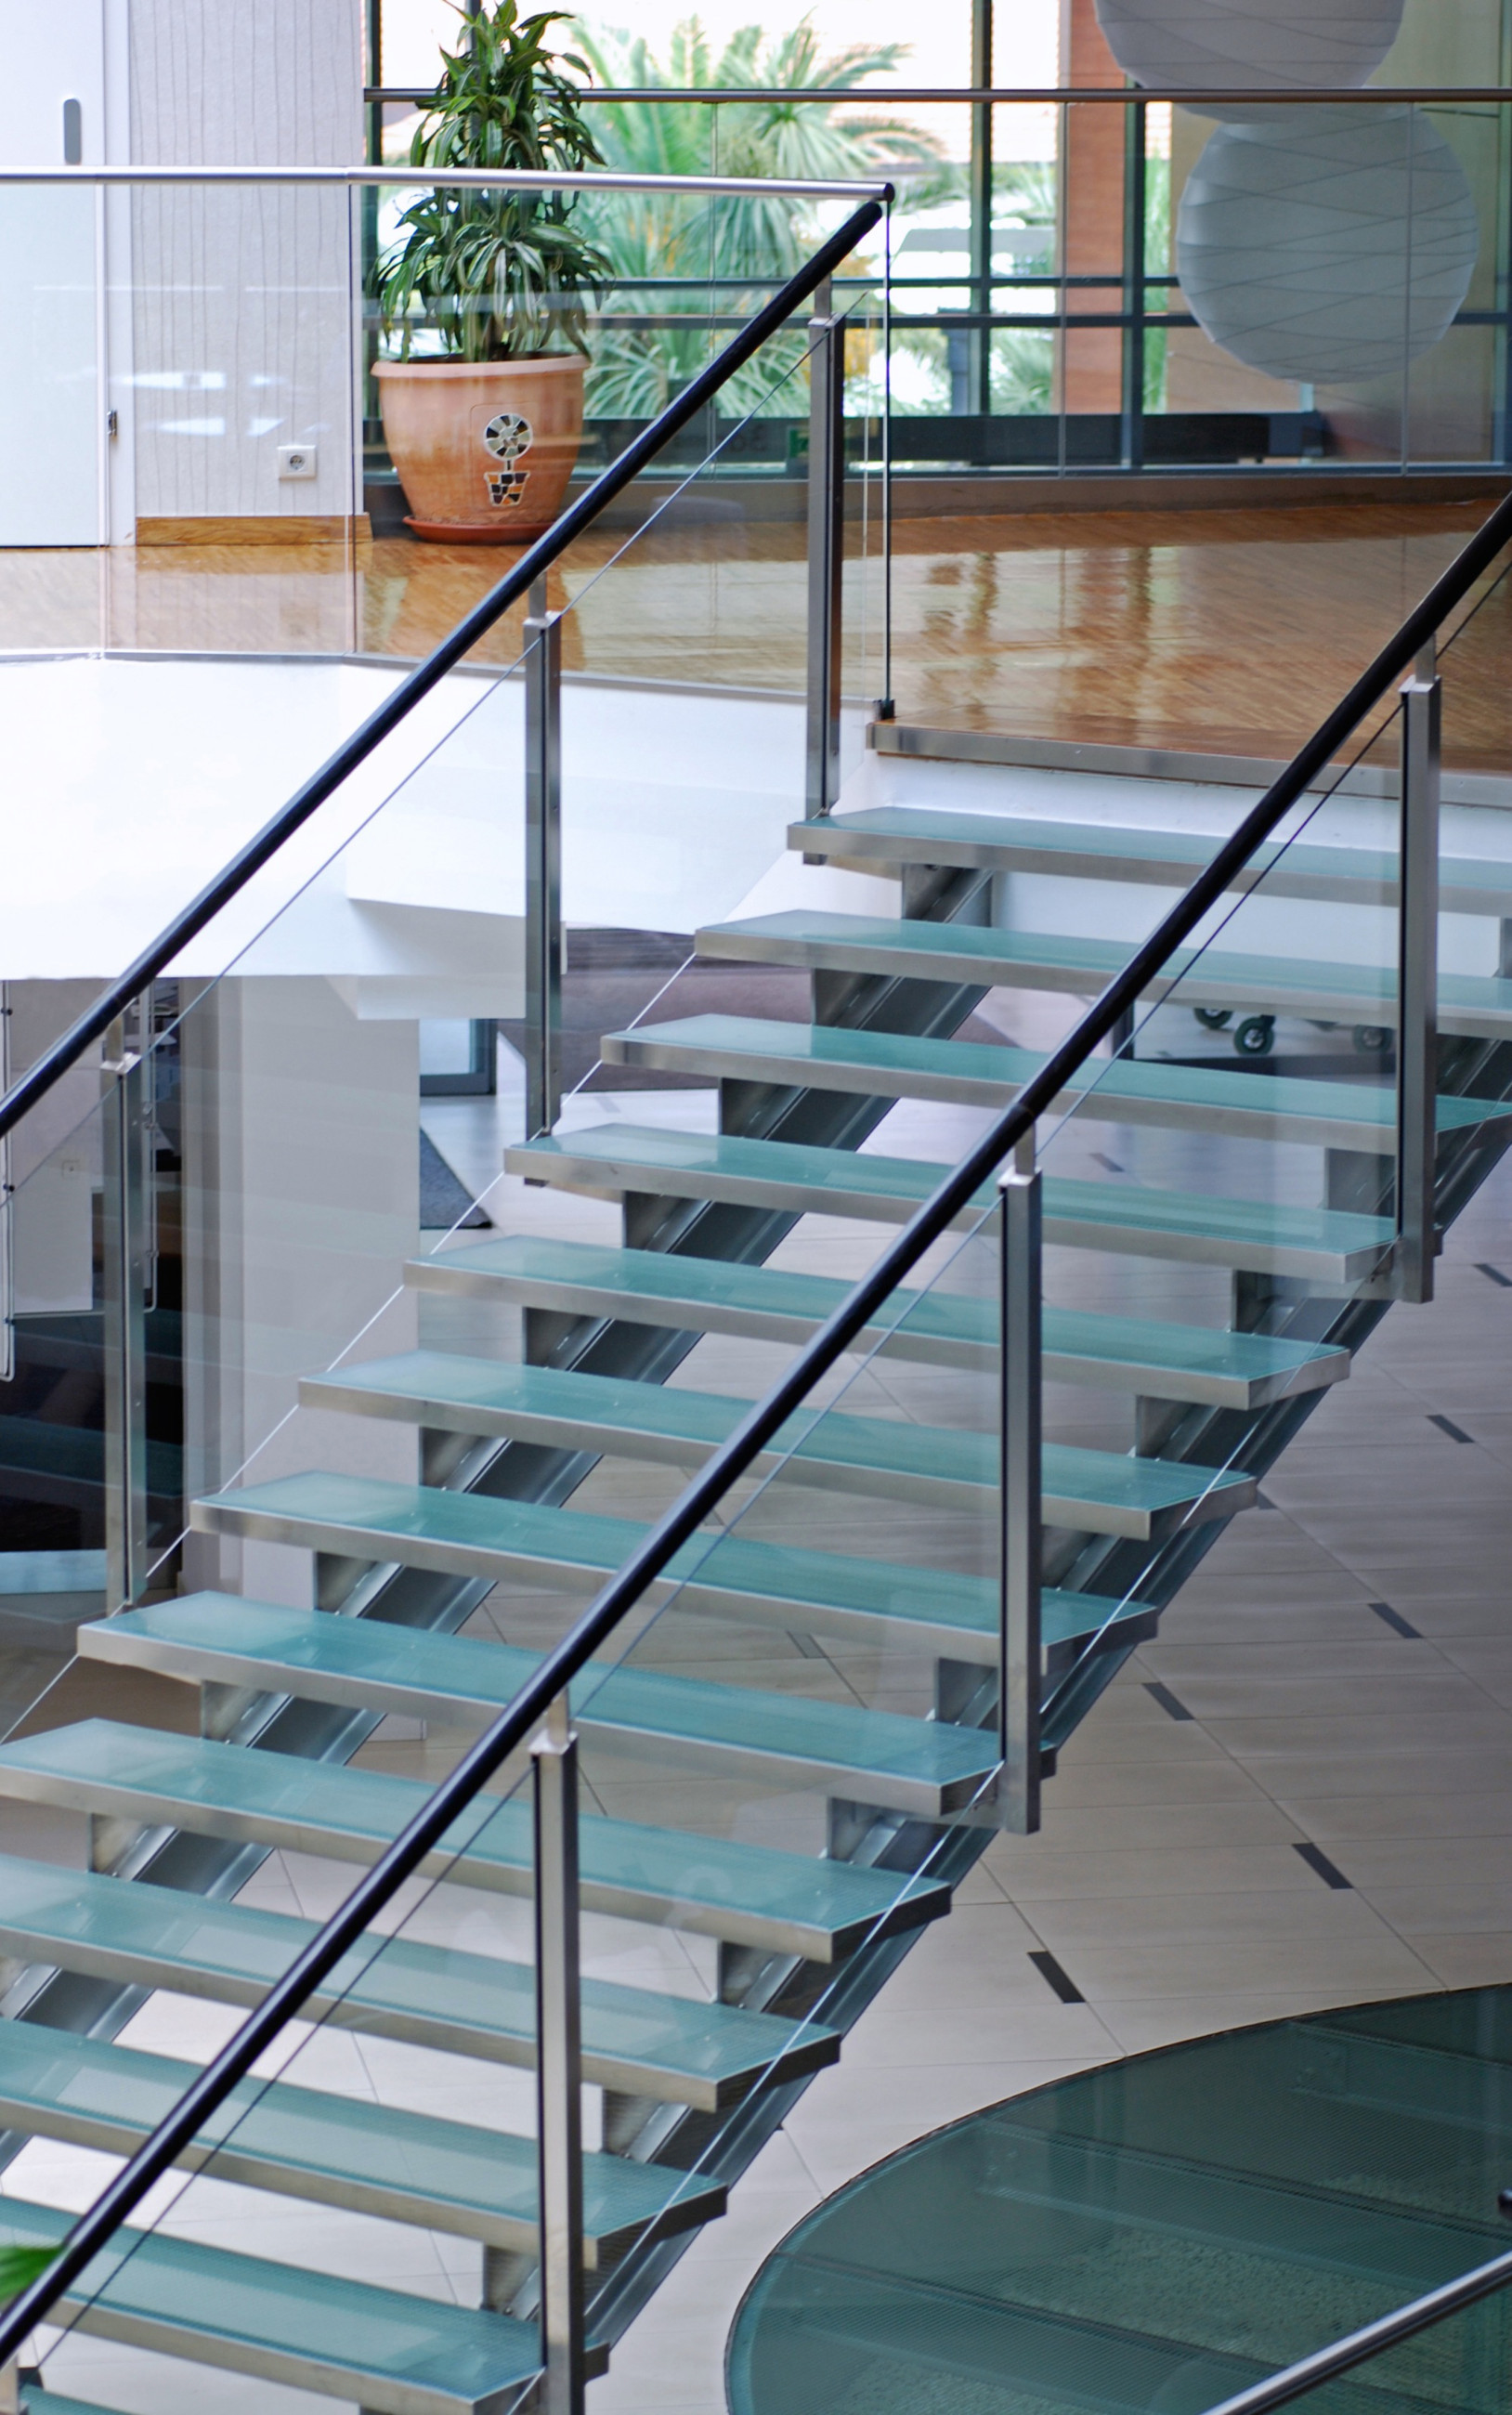 Patterned glass stairs with timber floors